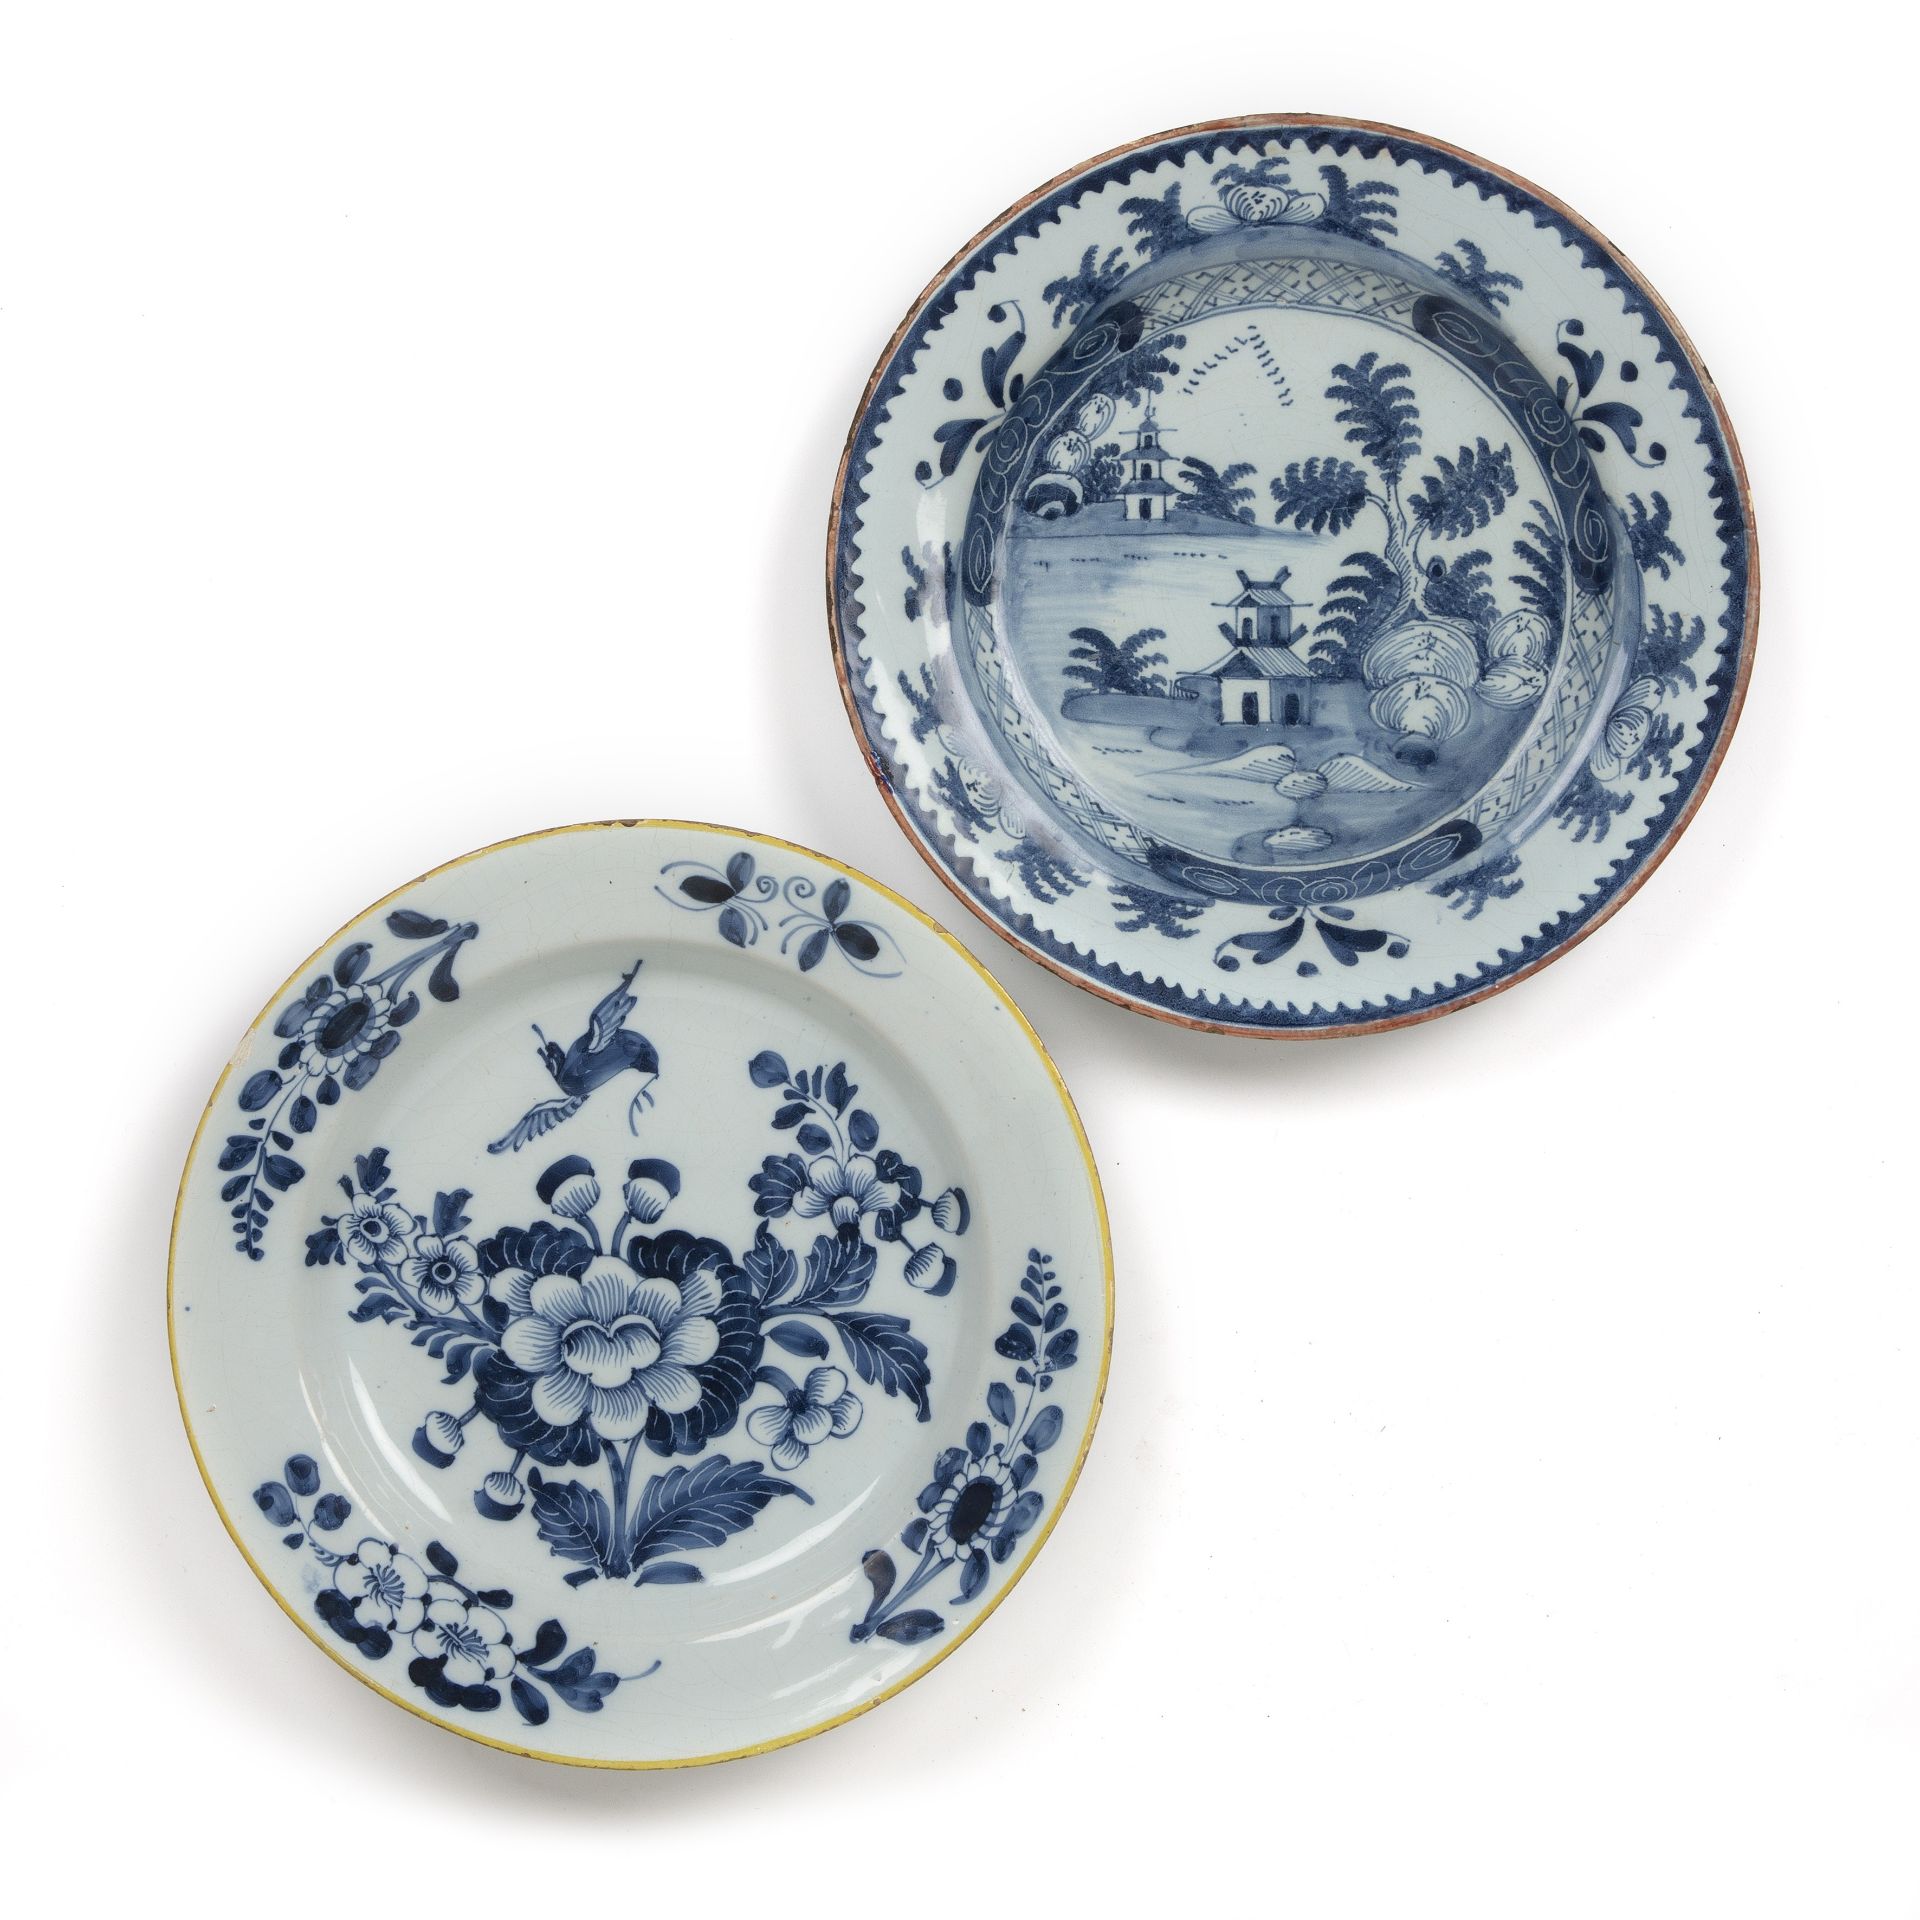 Two 18th century London Delft chargers, one with chinoiserie scenes and one with flowers, circa